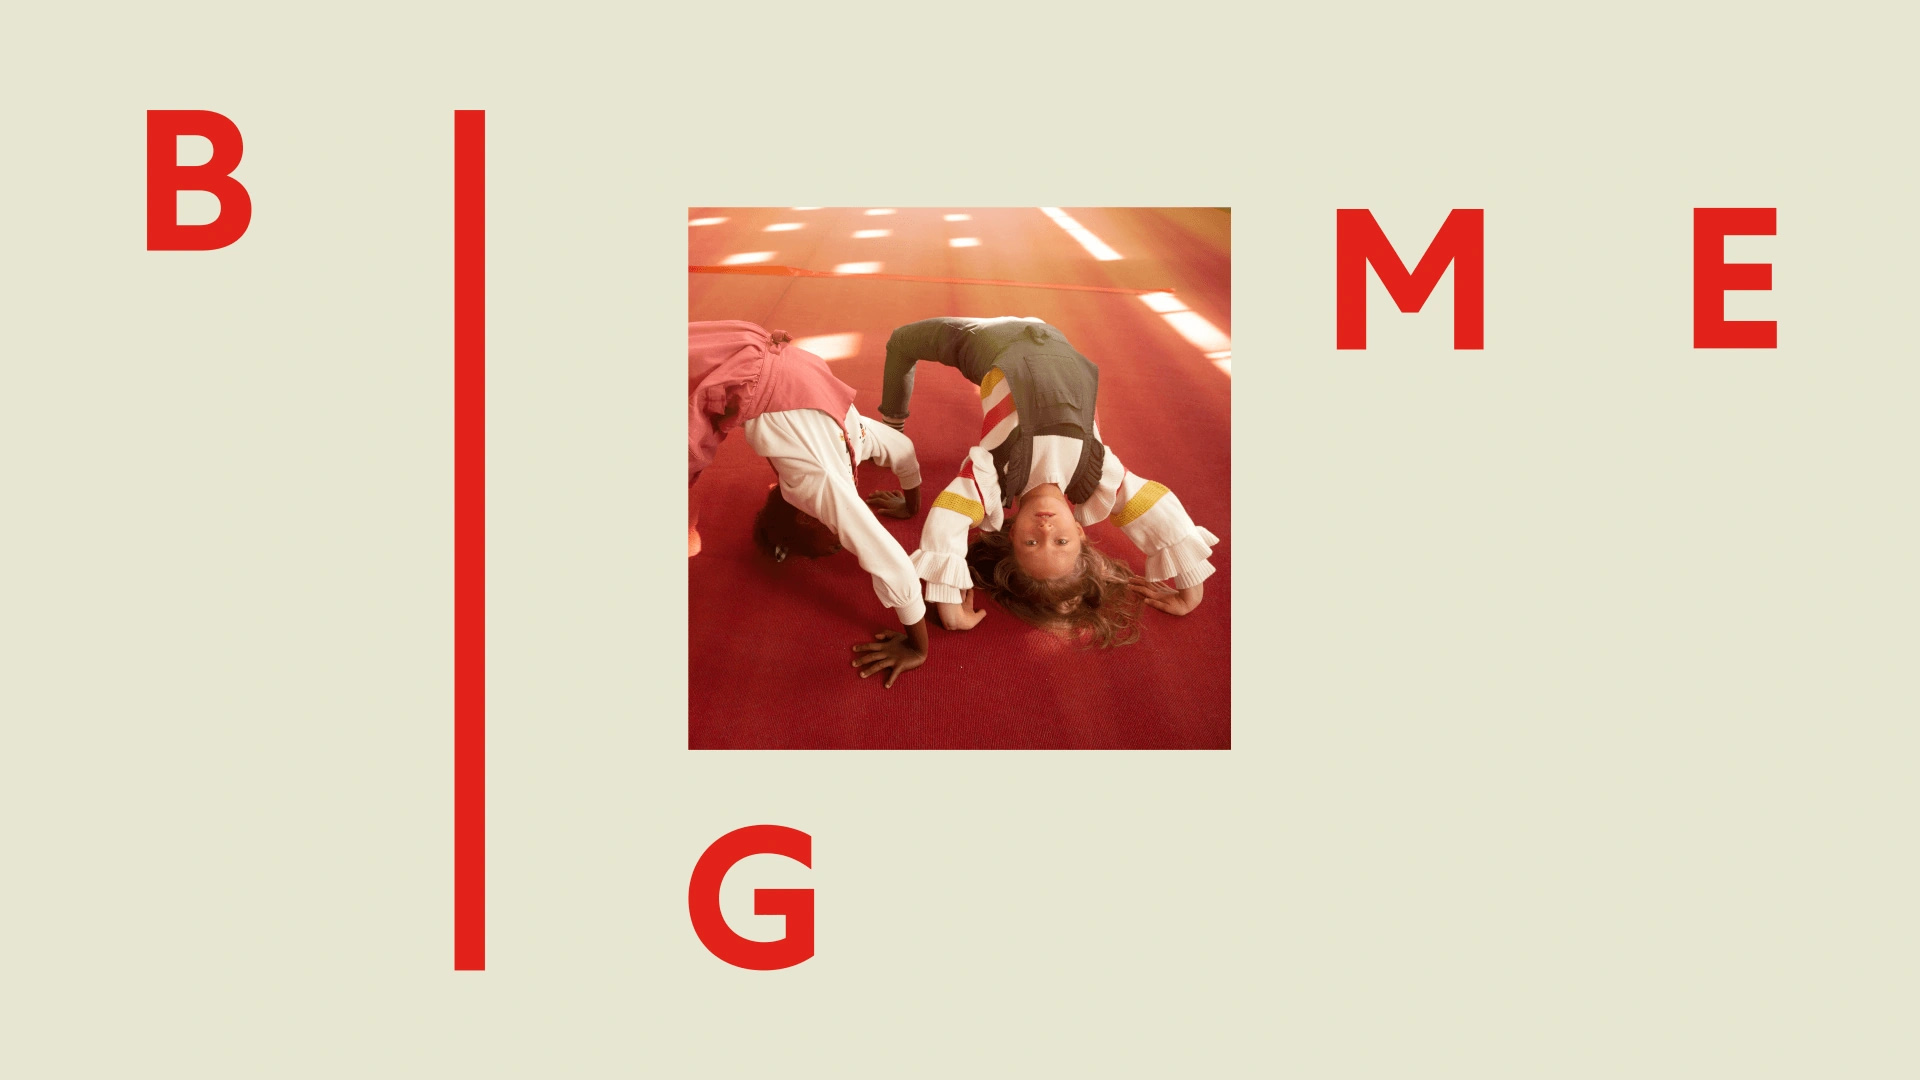 Image taken from the Zippy motion film, a visual composition with a photograph of two kids and the words "Big Me".